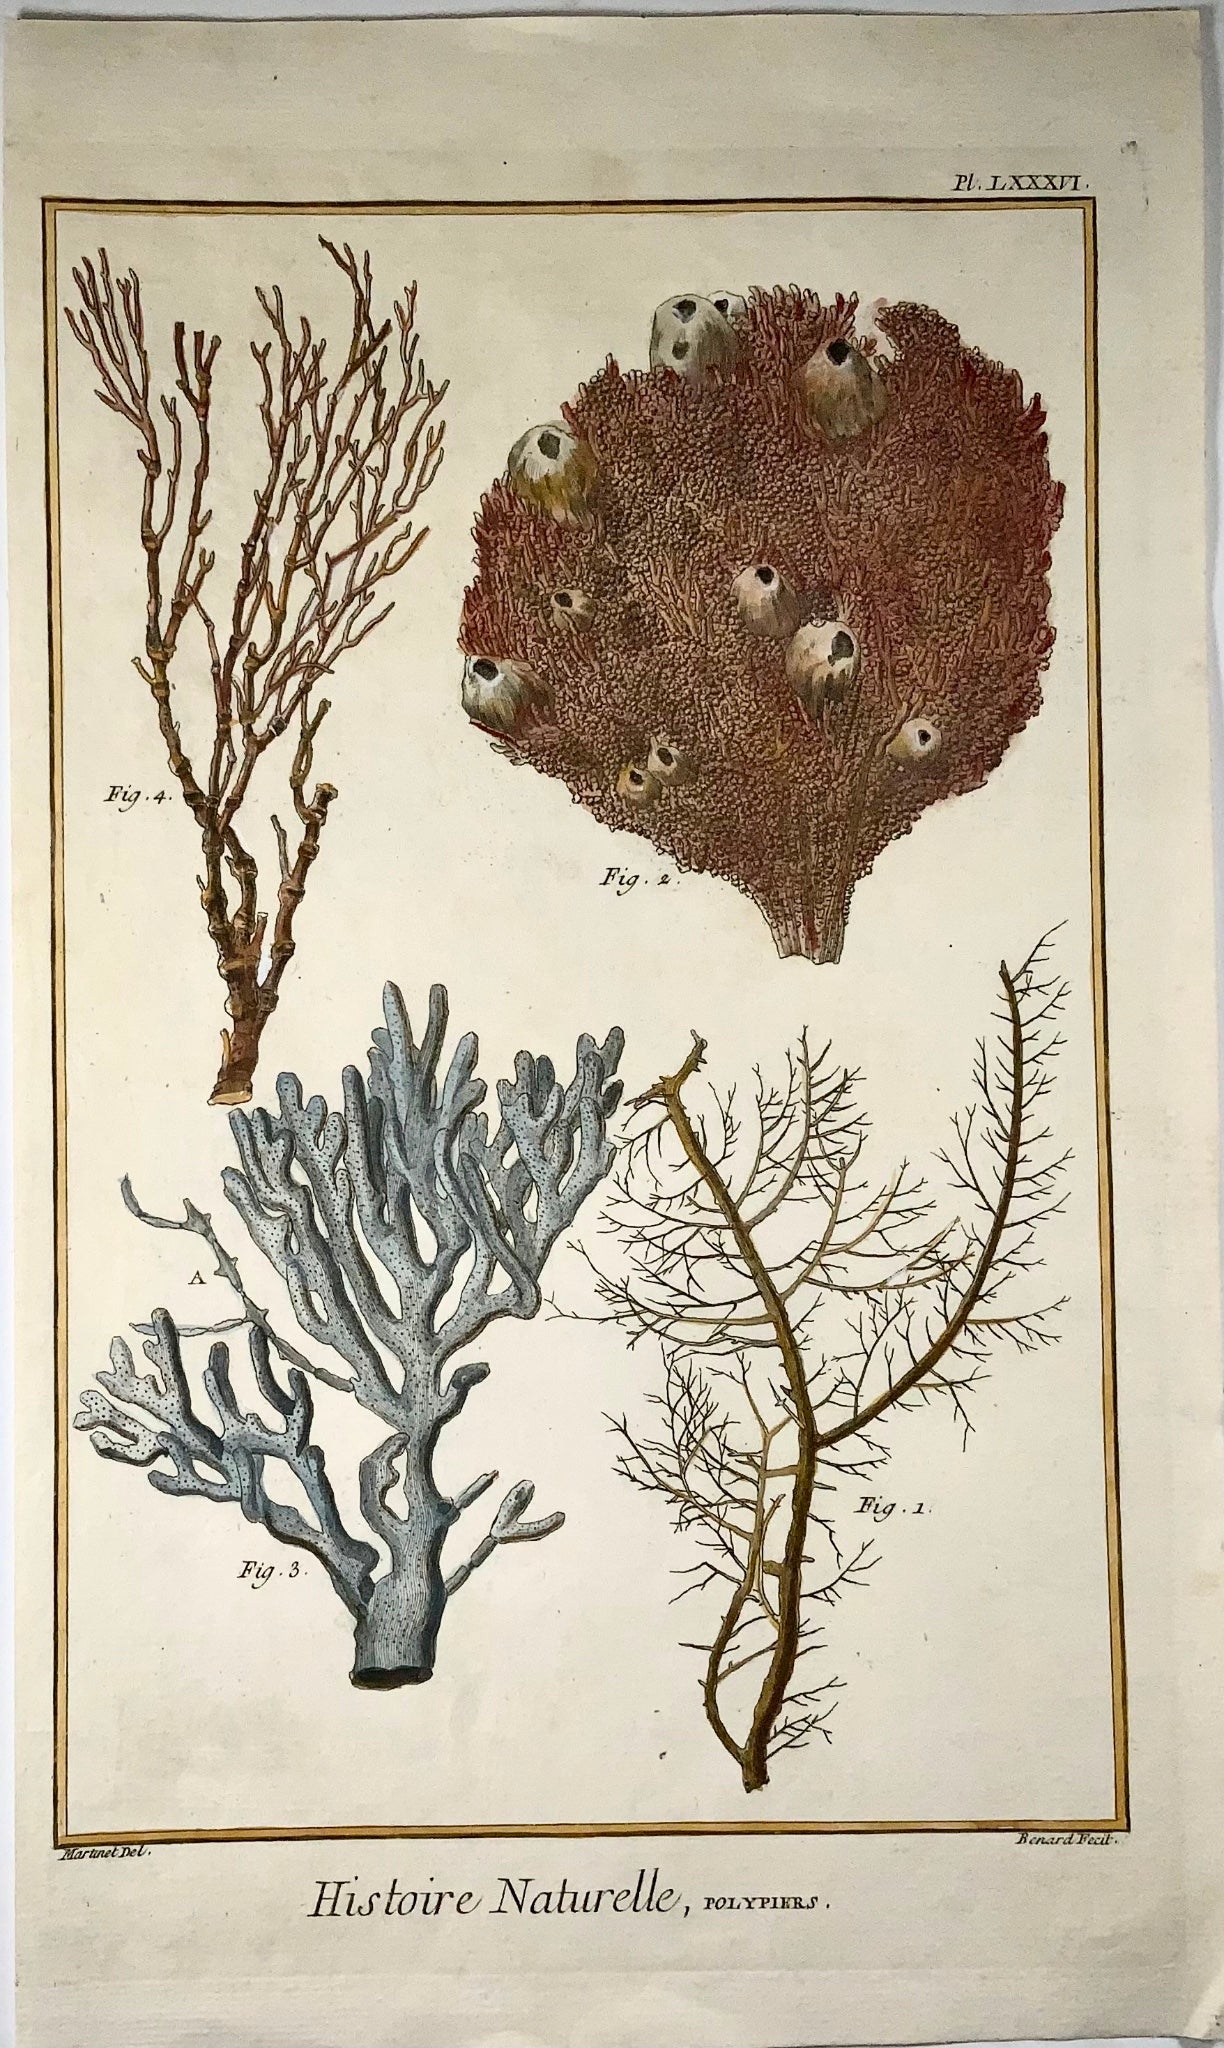 1751 Coral, Polypiers, Martinet, marine life, hand coloured, 39 cm